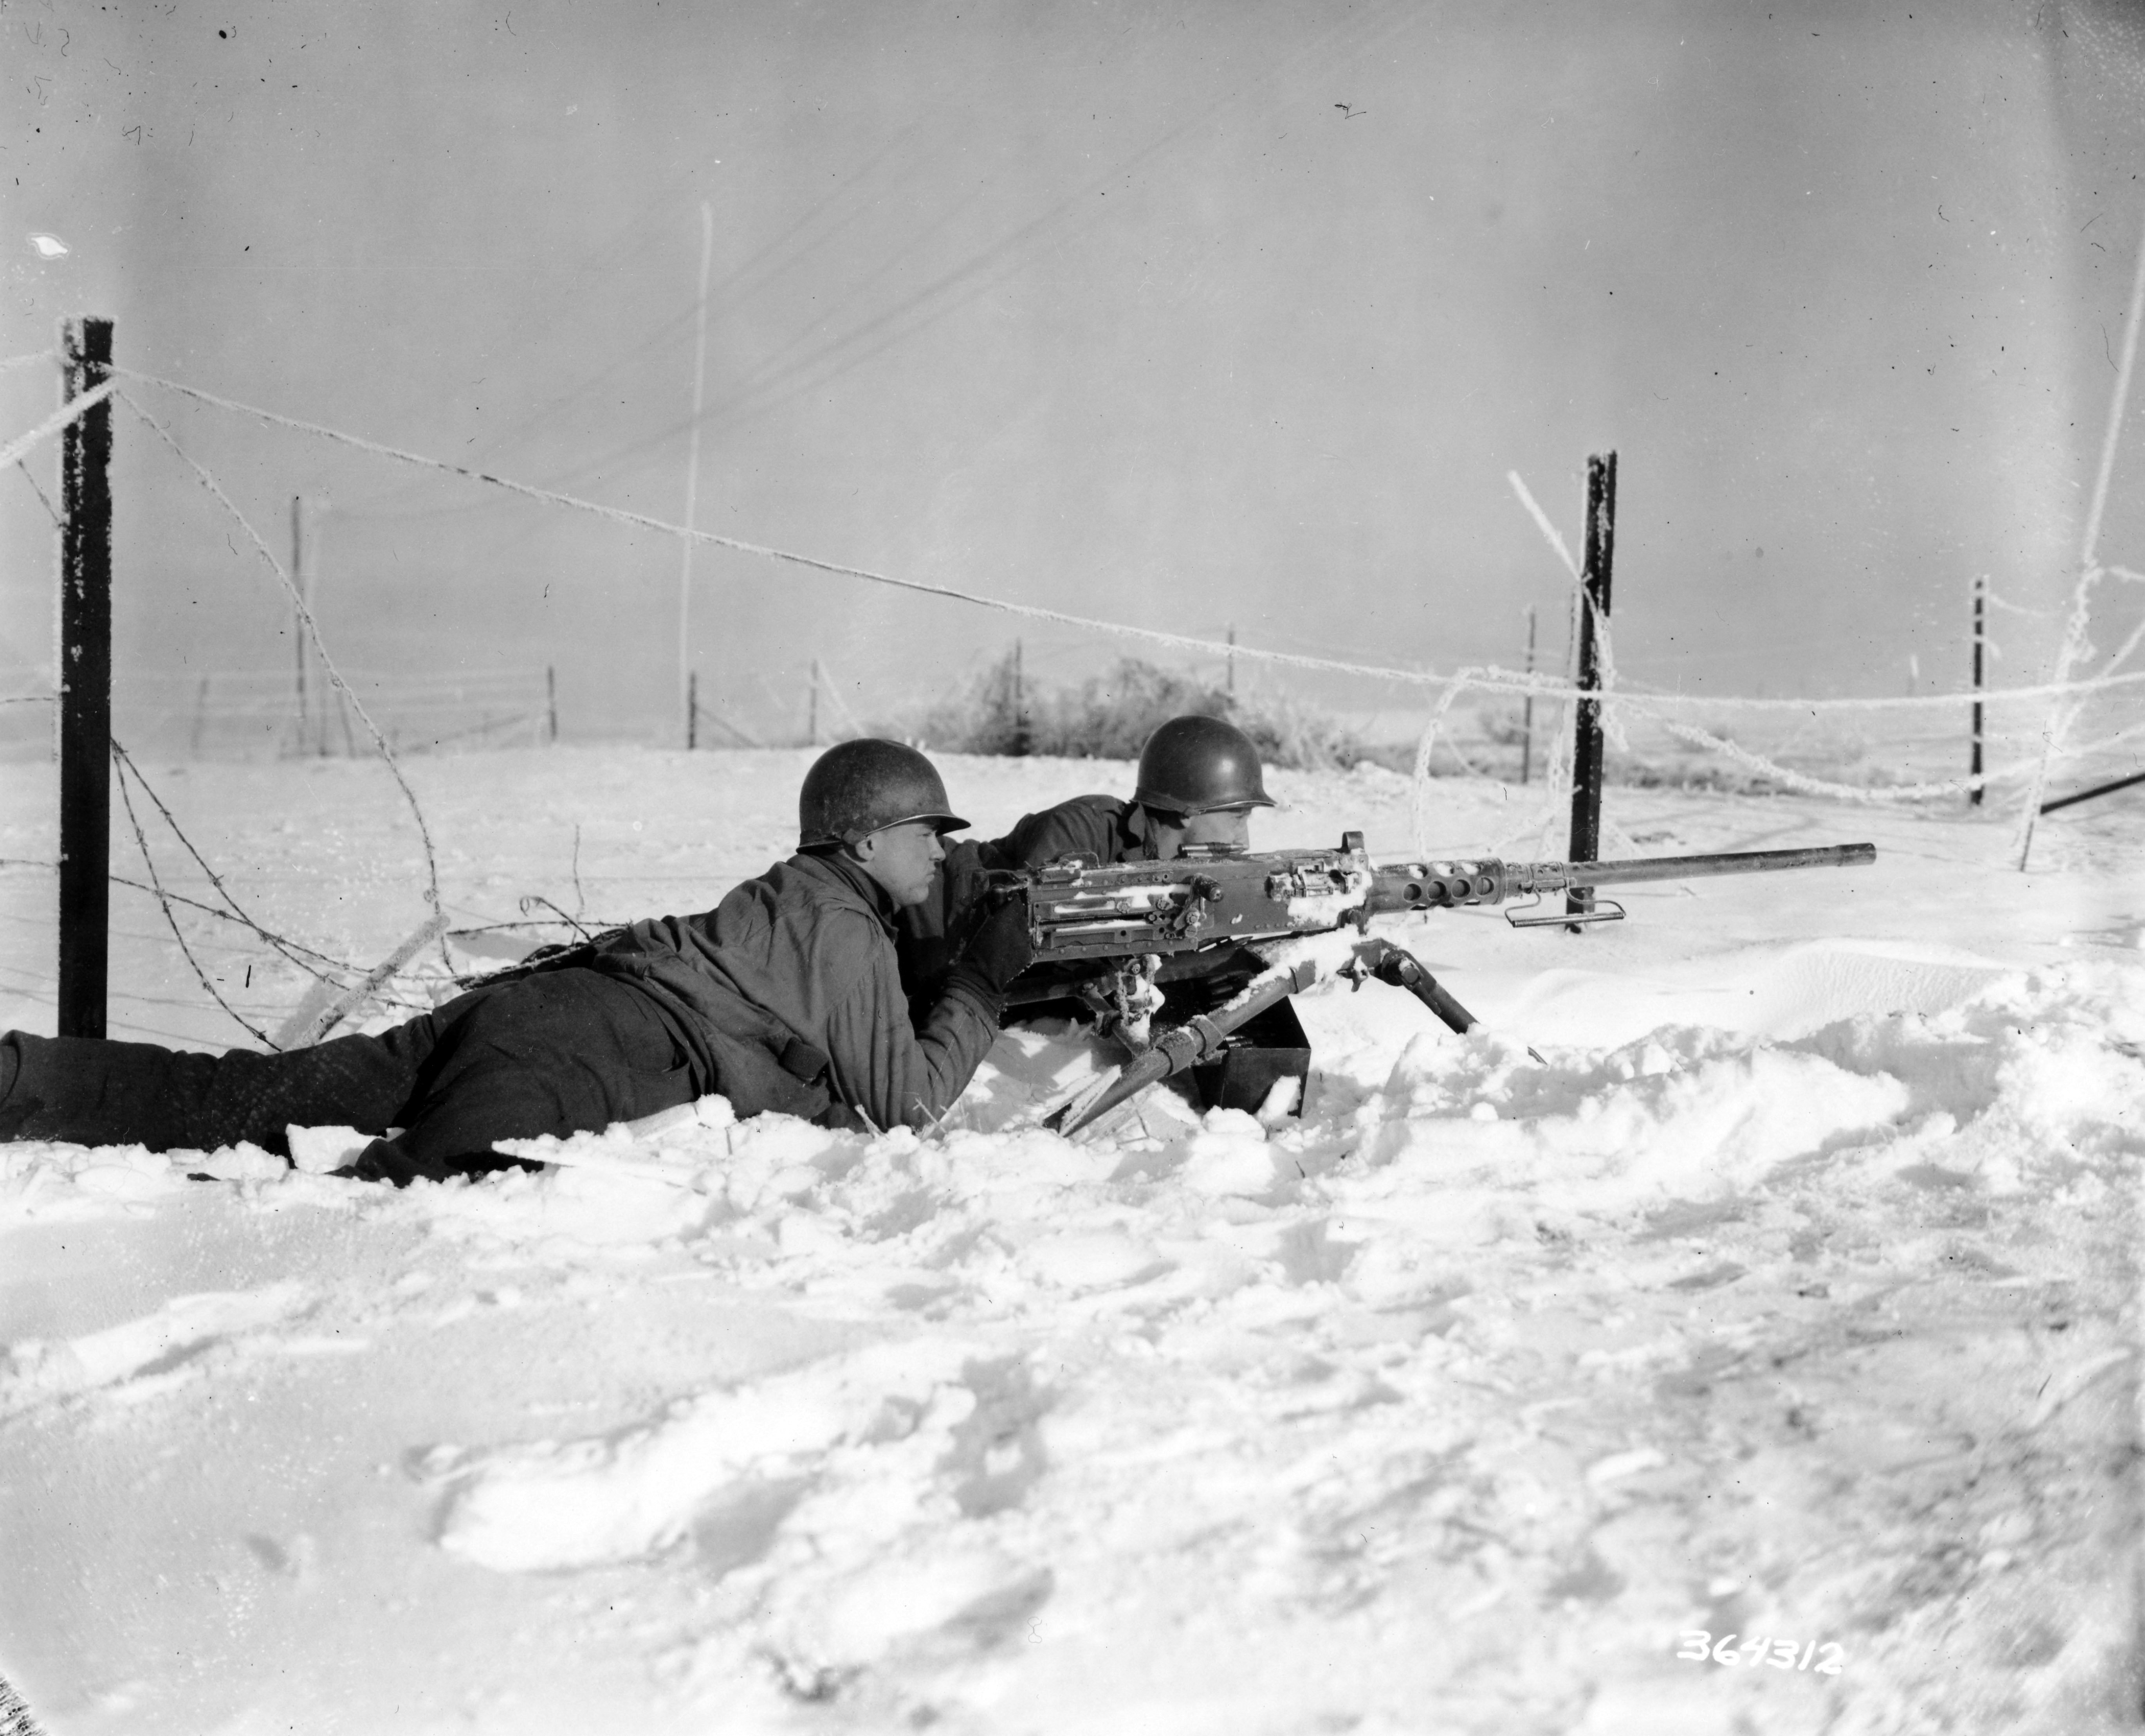 Gunner Pvt. Nick Hotolsky, Russellton, Pa. and gunner Pfc. Roman Vinicki, South Bend, Ind., laying in the snow and guarding a road junction with their .50 caliber machine gun.